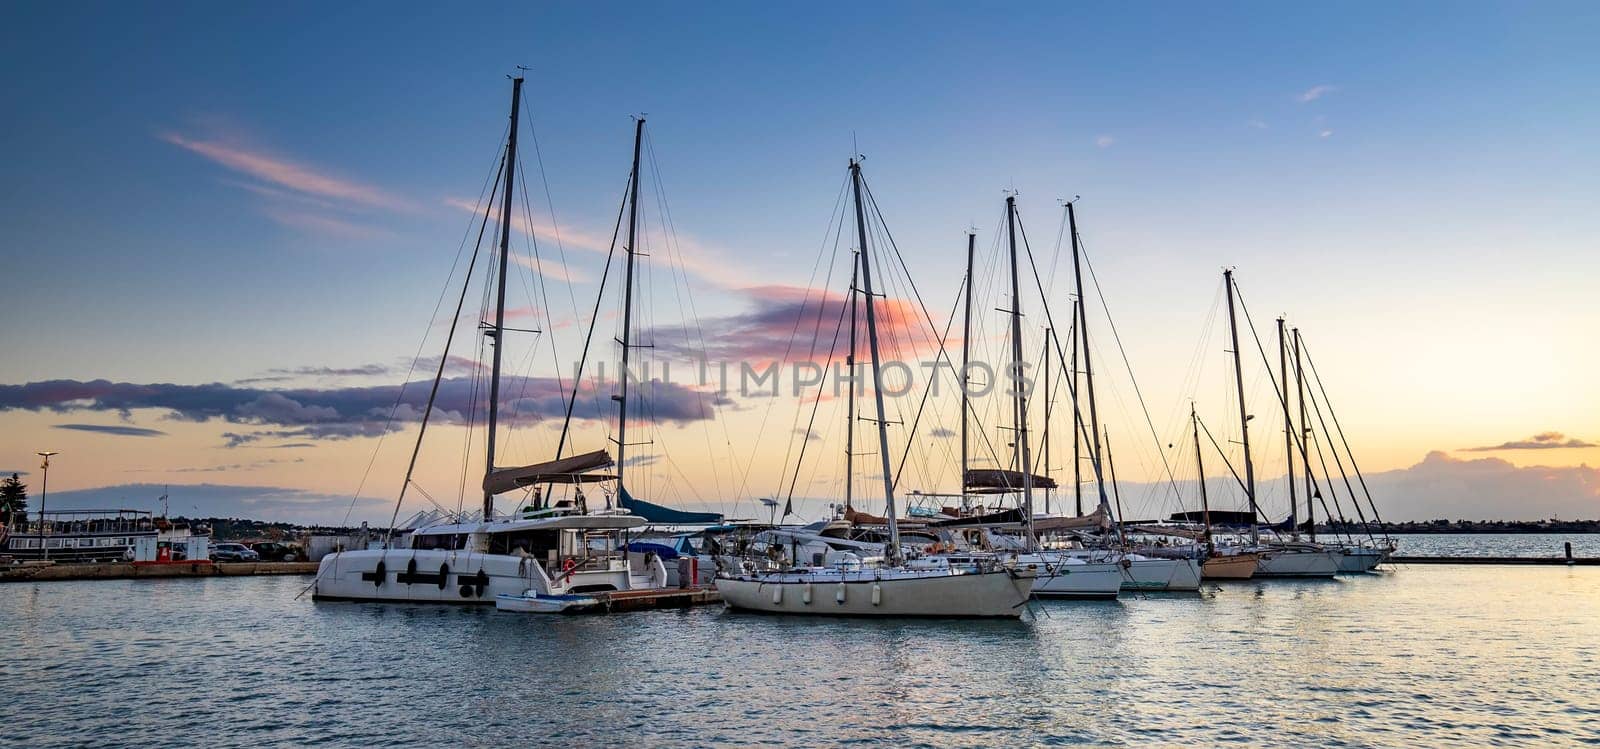 Panoramic view of Yachts and boats after sunset in the harbor.